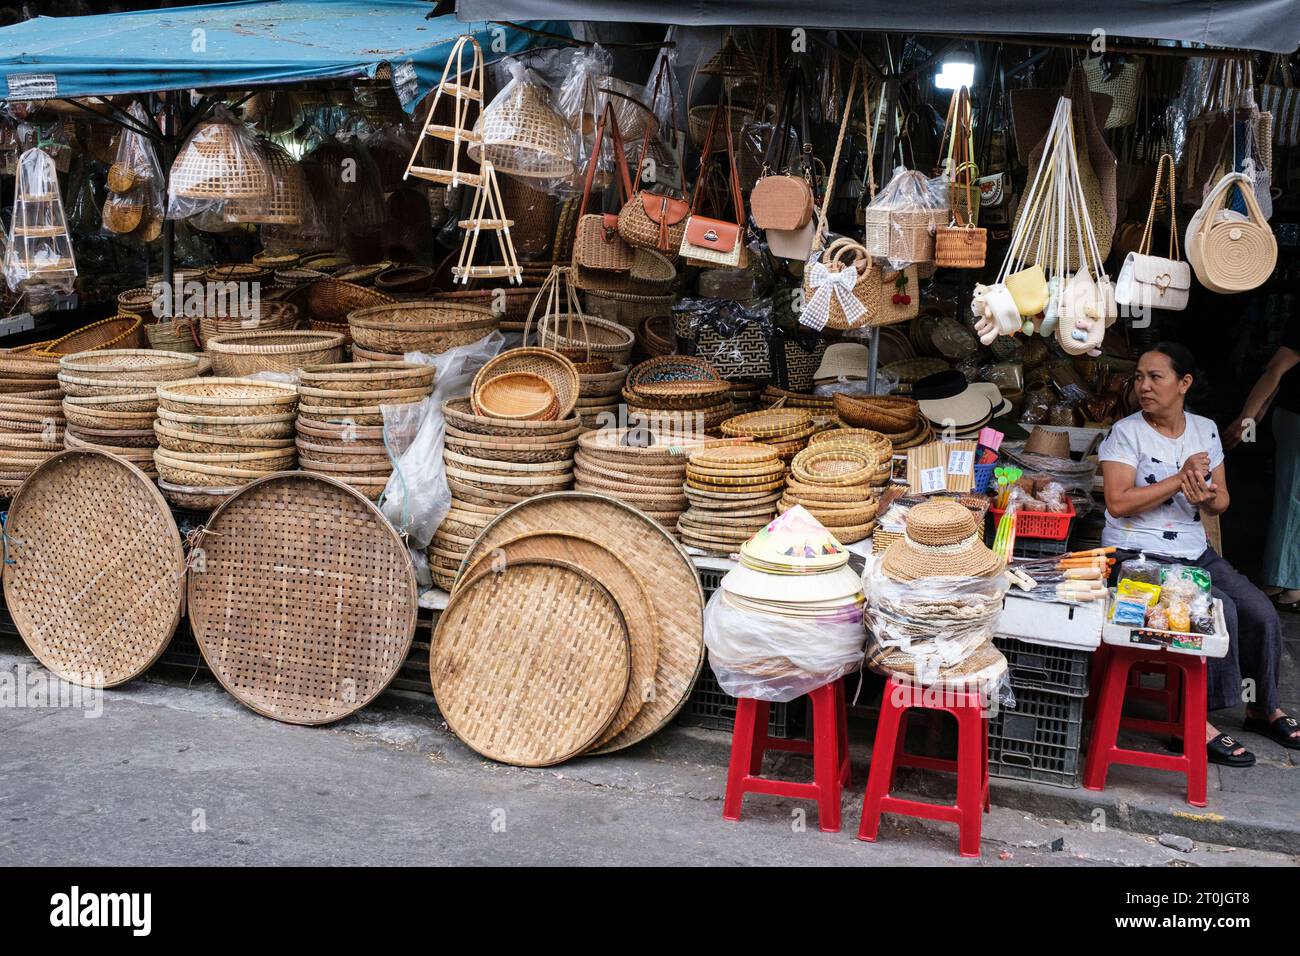 Hoi An, Vietnam. Vendor of Baskets and Trays in the Market. Stock Photo